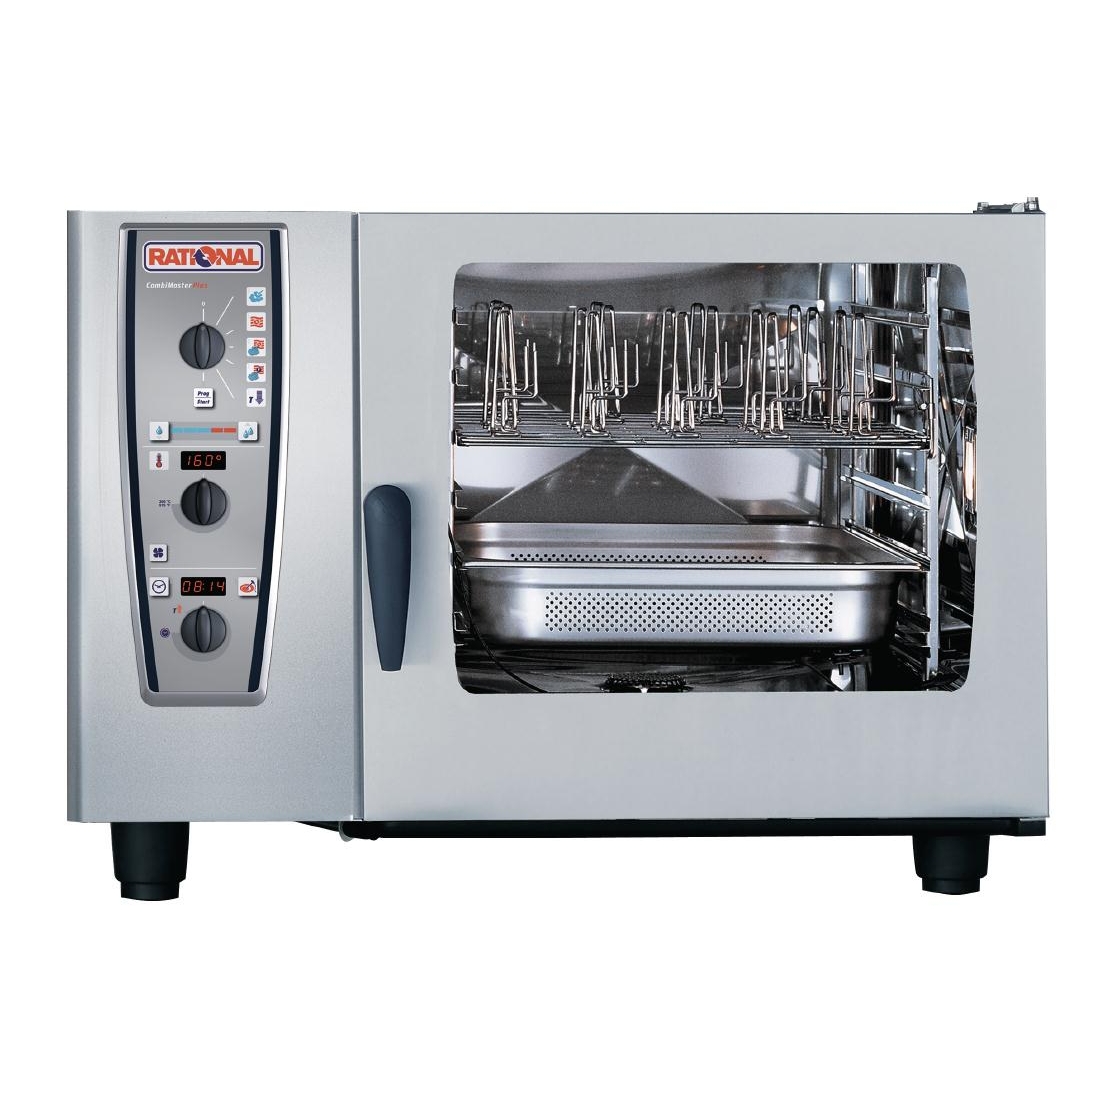 Rational Combimaster Plus Oven 62 Natural Gas